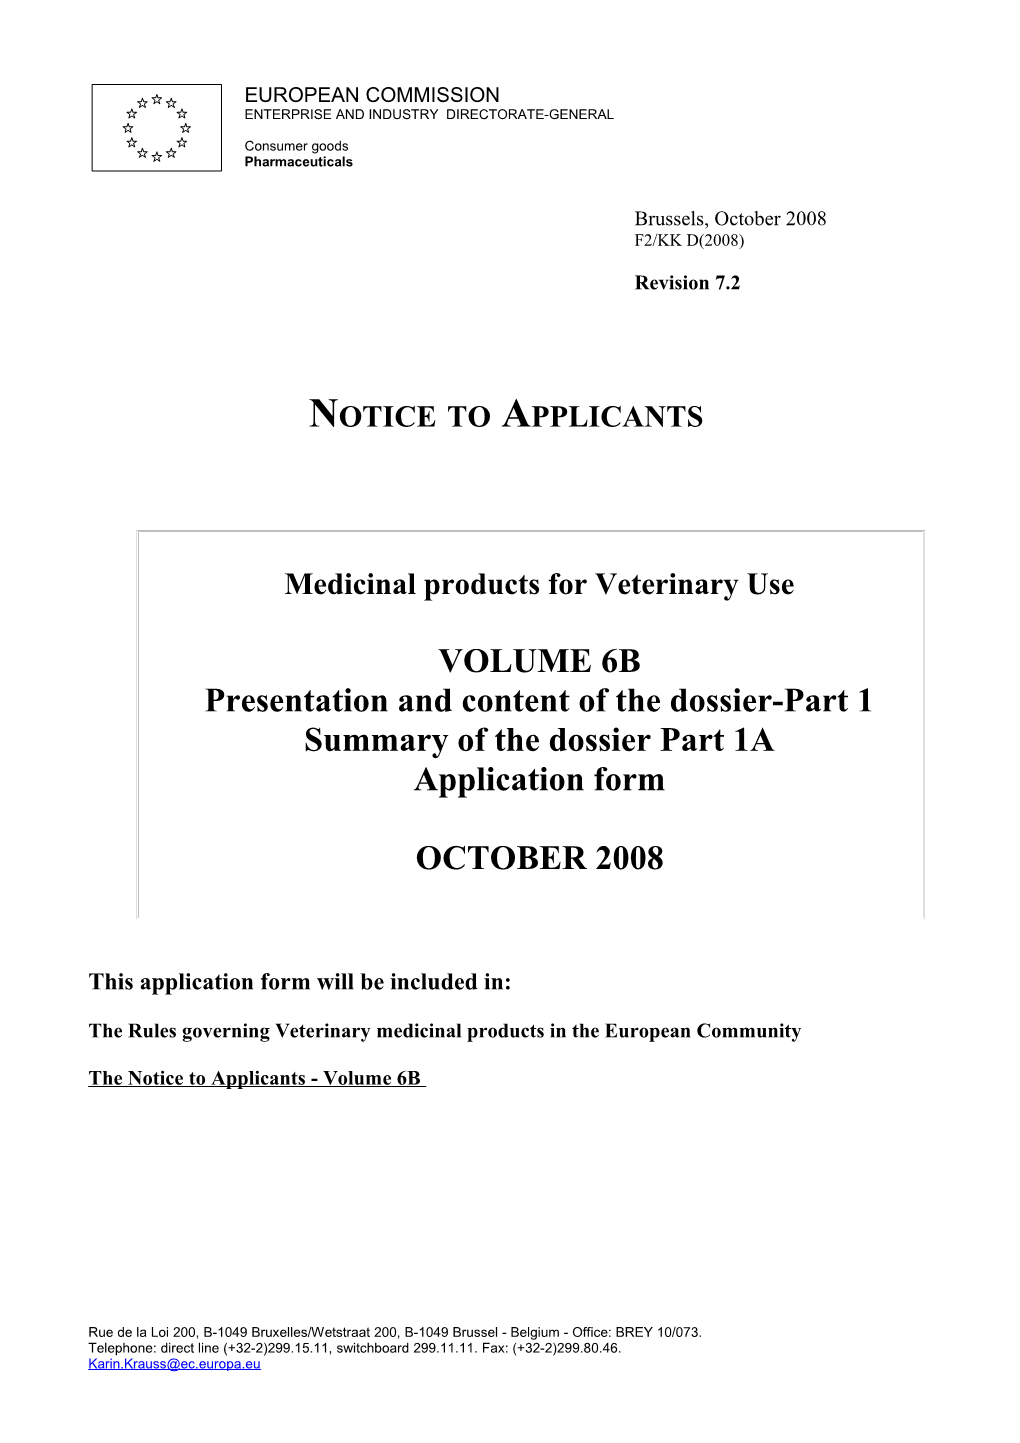 Medicinal Products for Veterinary Use